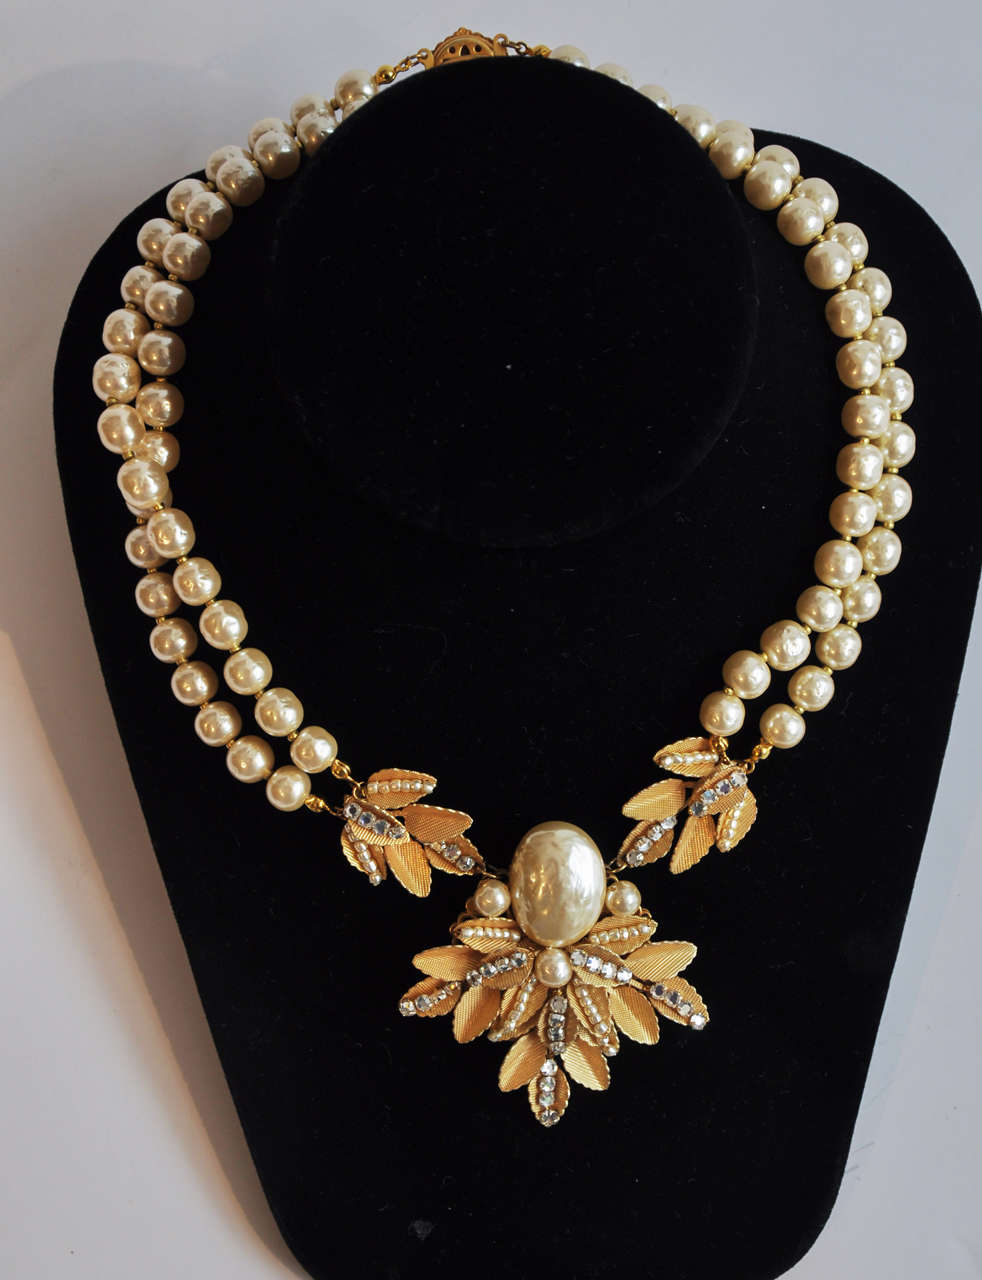 A double-strand pearl necklace with a stylized floral pendant by Miriam Haskell.
Beautiful detailing combining textured gilt metal, faux seed pearls and rhinestones as is typical of Haskell's best work.  Marked on clasp.

Length of center